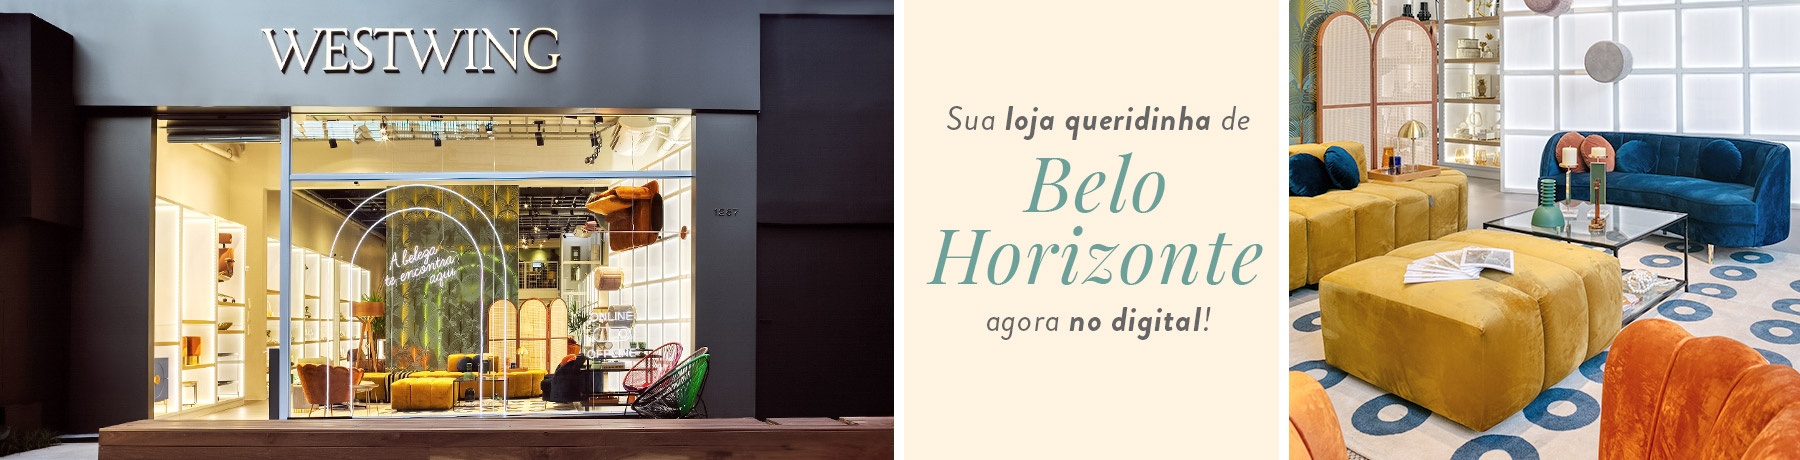 Westwing Store Belo Horizonte | Westwing Now